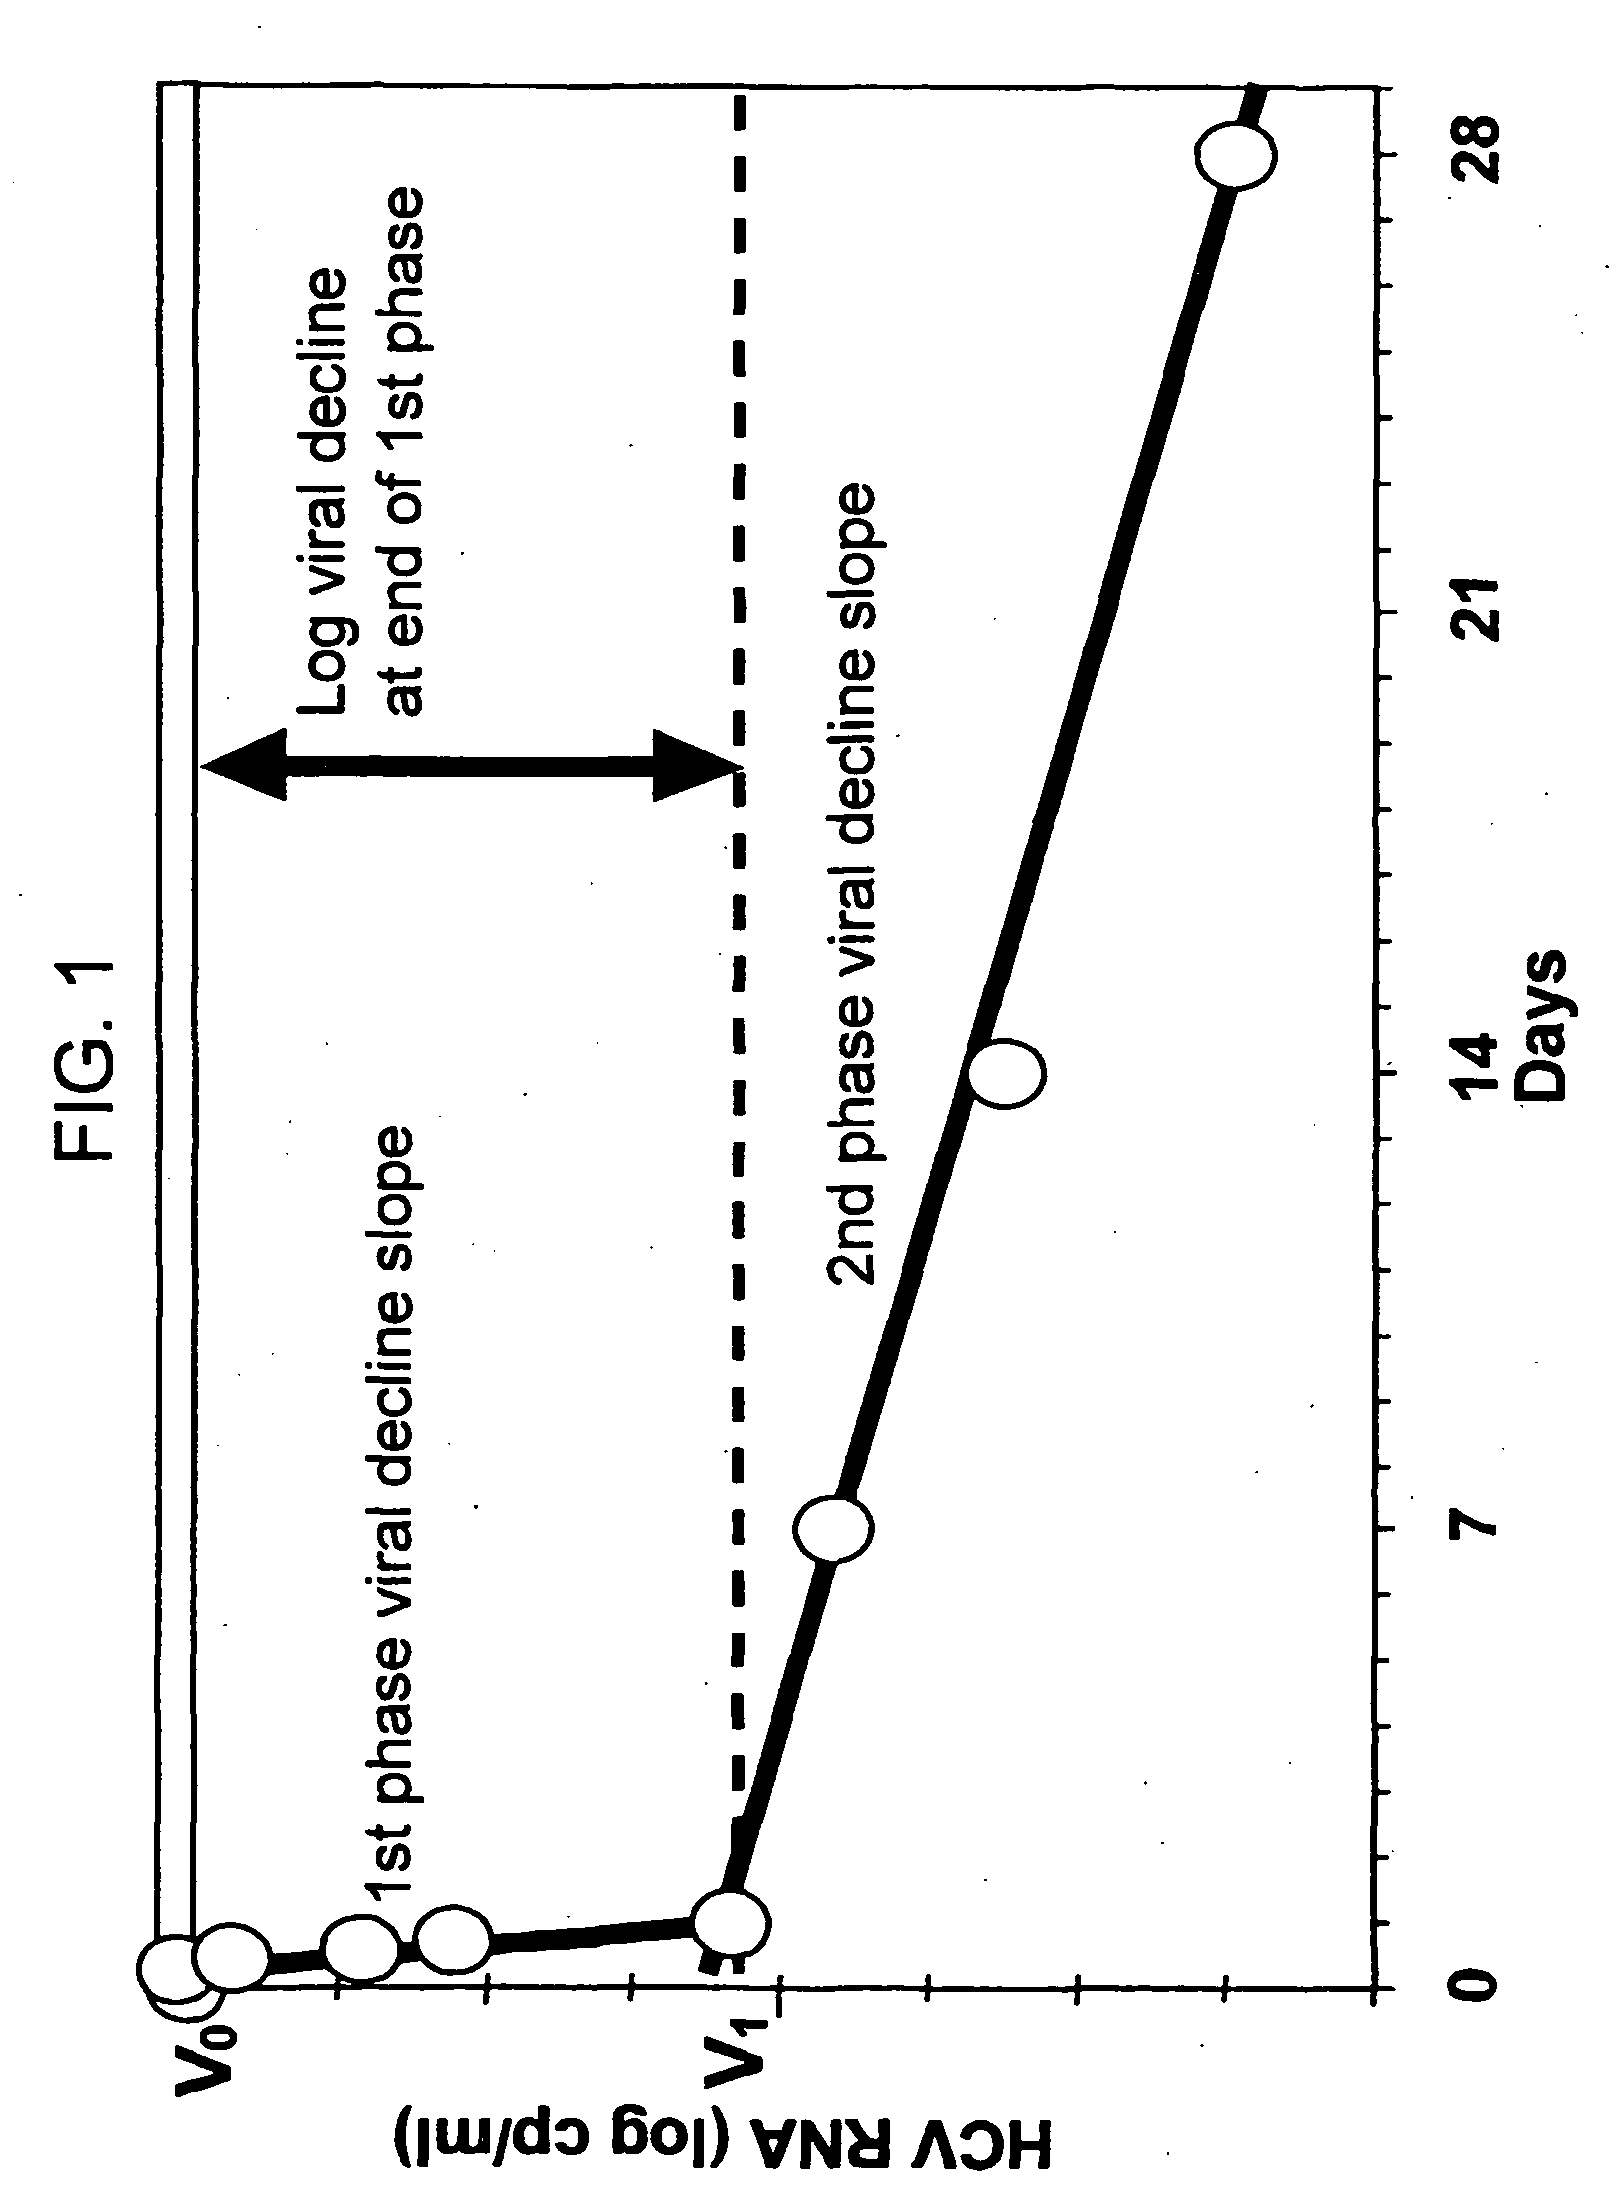 Method of treating hepatitis virus infection with a multiphasic interferon delivery profile